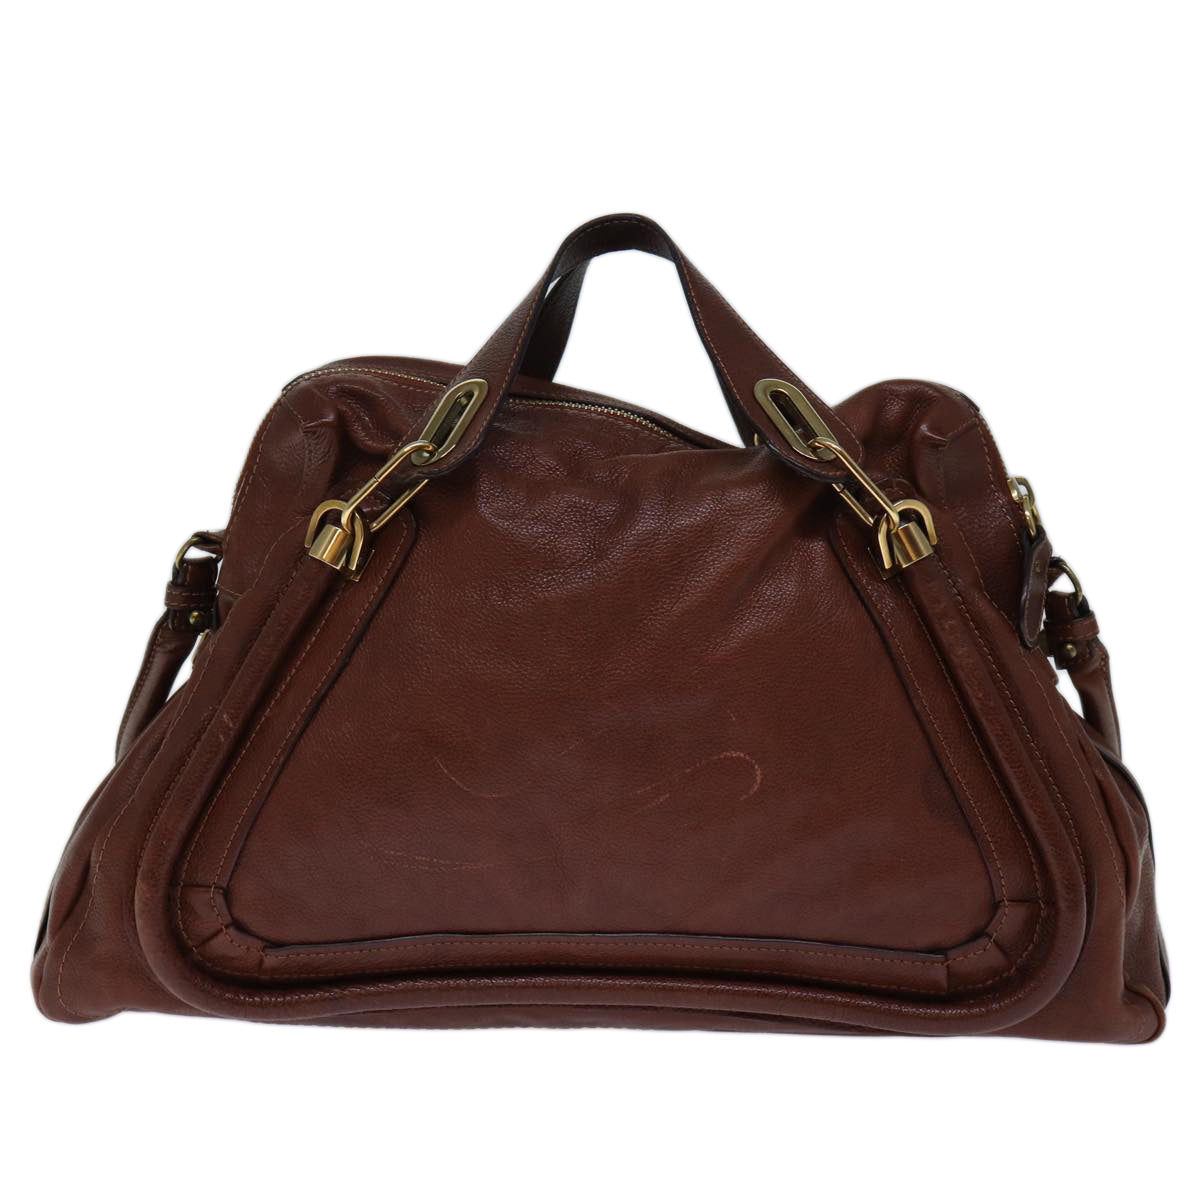 Chloe Mercy Hand Bag Leather 2way Brown Auth bs14066 - 0